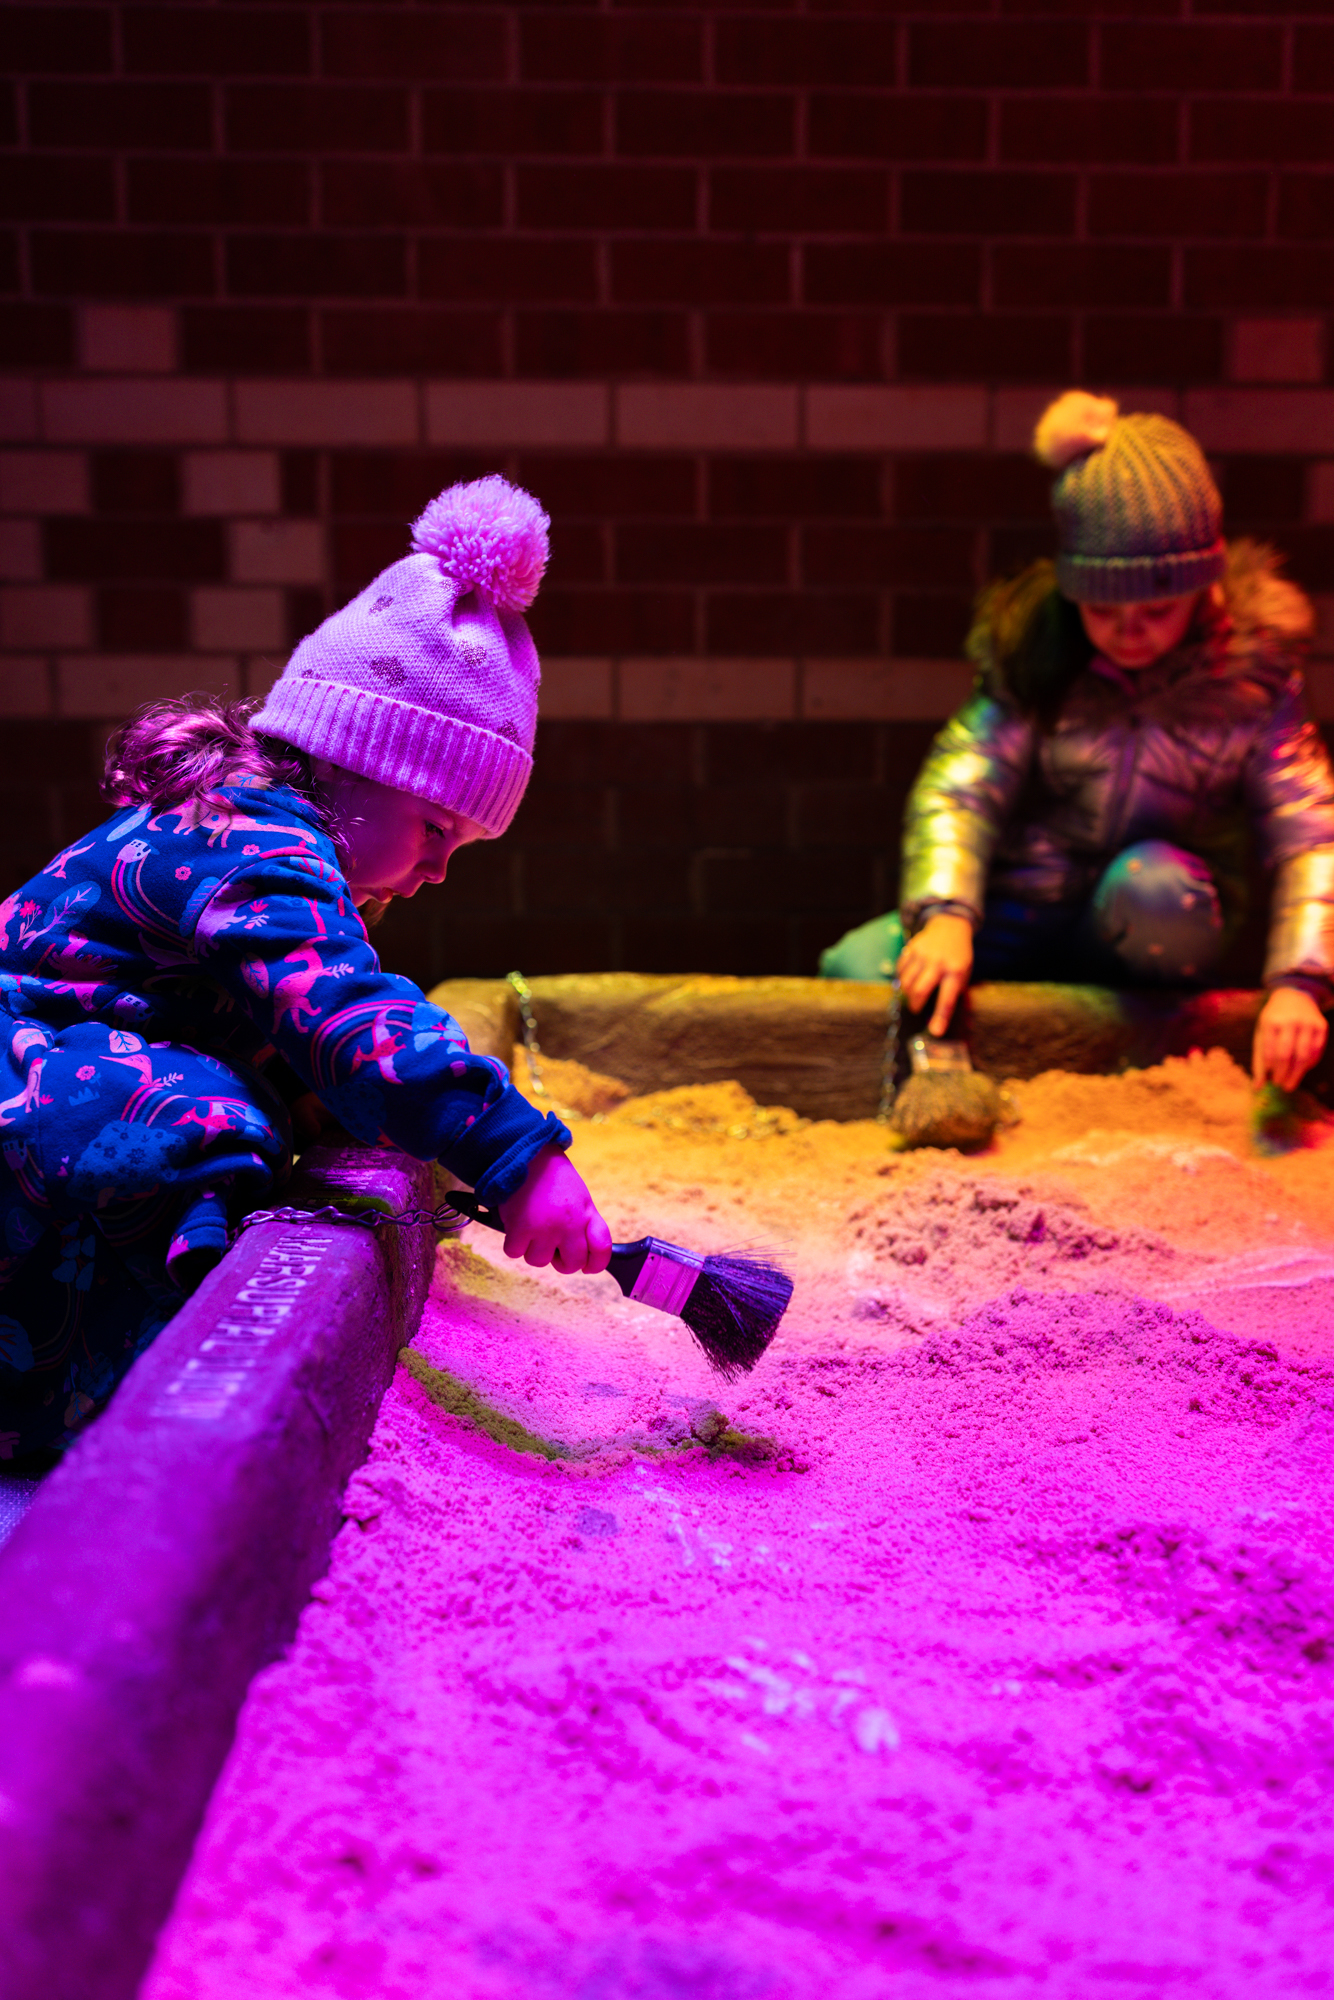 Dig for fossils and learn about who lived on earth millions of years ago